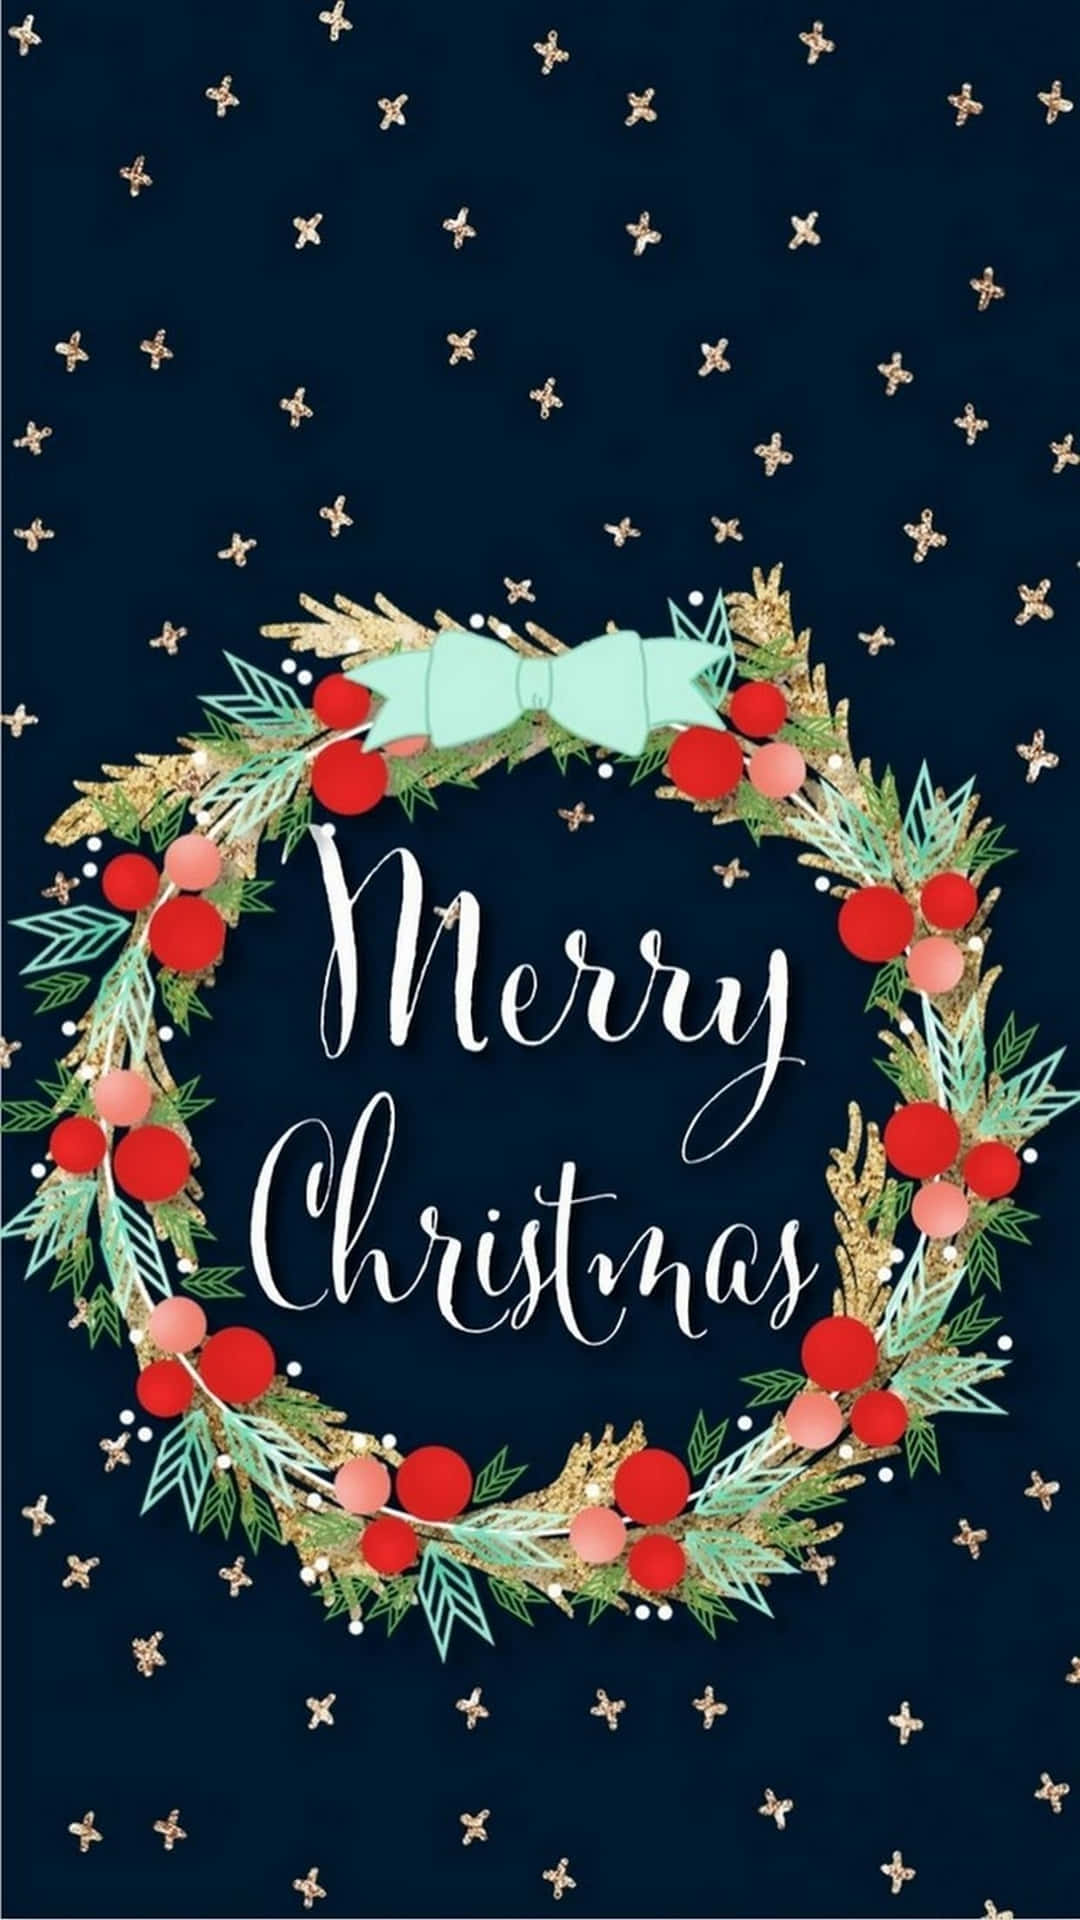 Merry Christmas Card With A Wreath And Stars